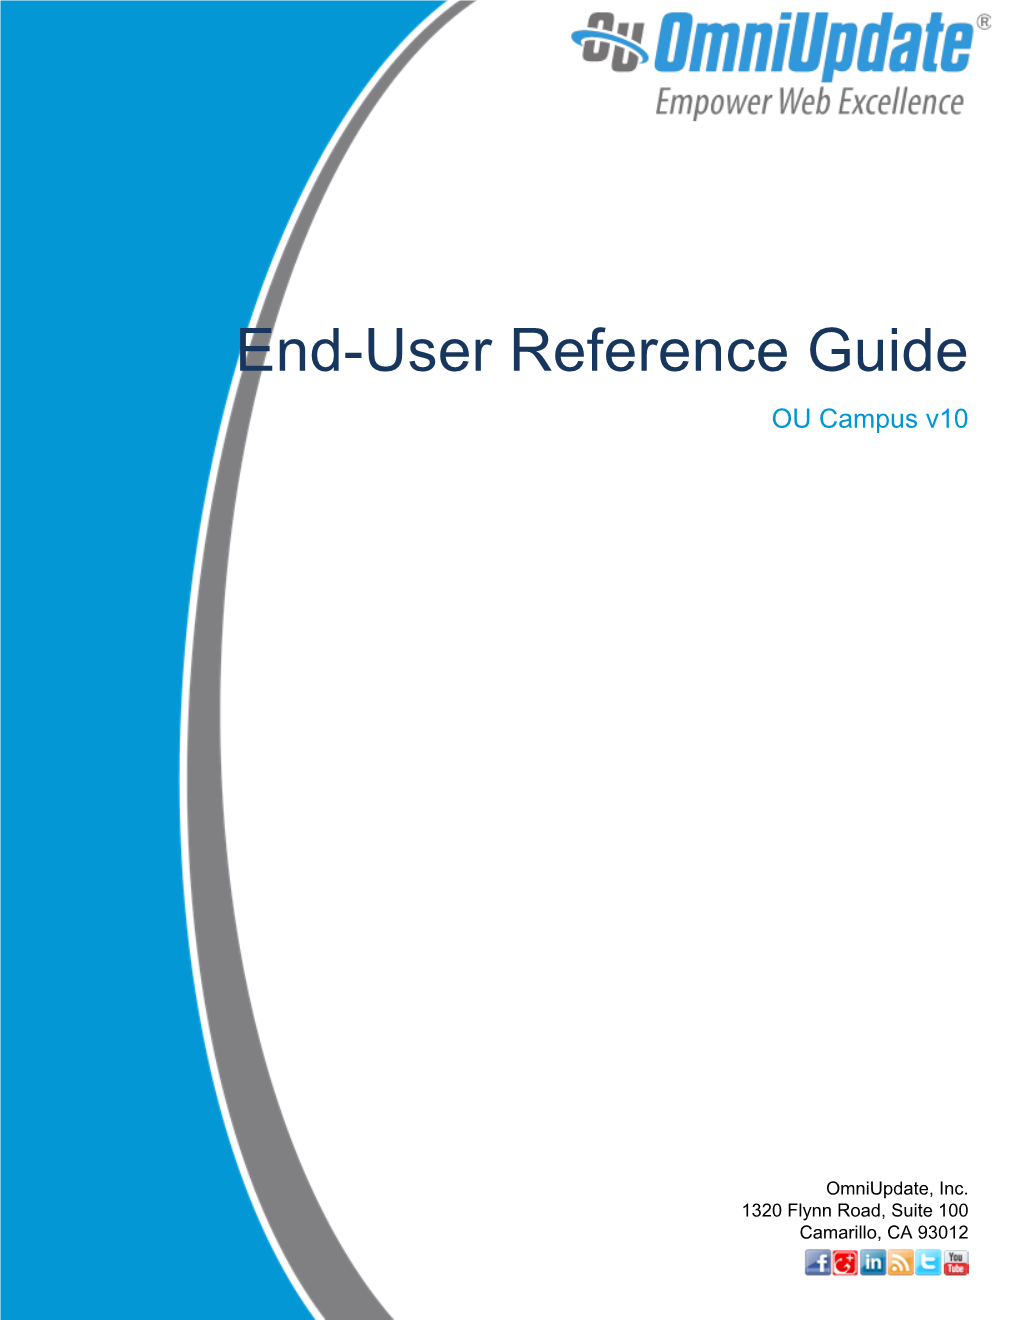 End-User Reference Guide OU Campus V10